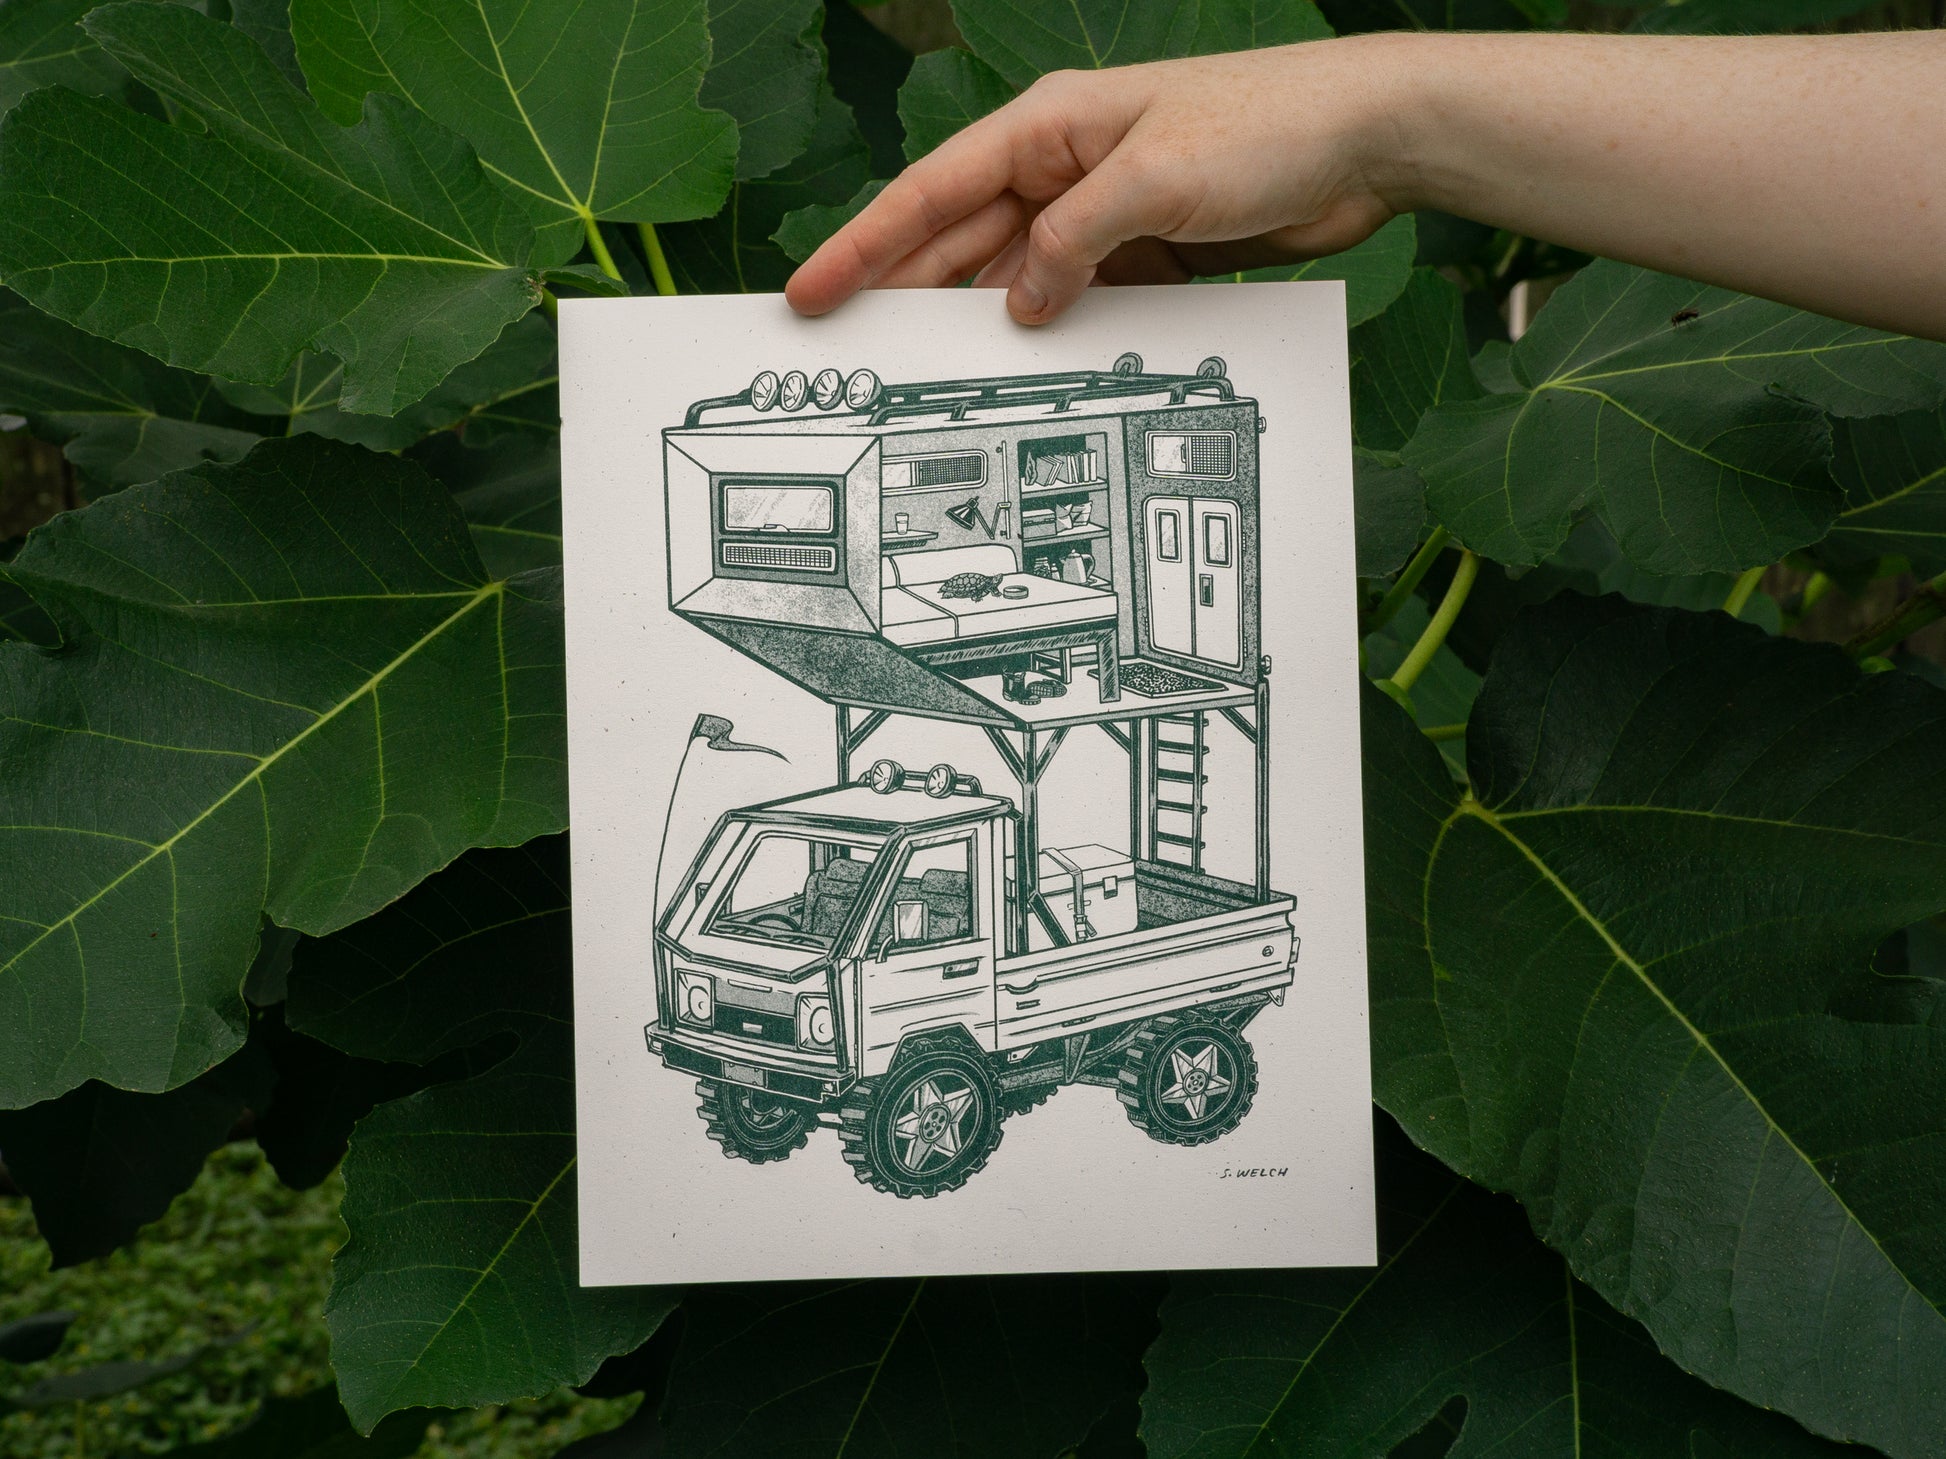 8 x 10 kei truck art print. It has been altered to have a living space above the truck bed.